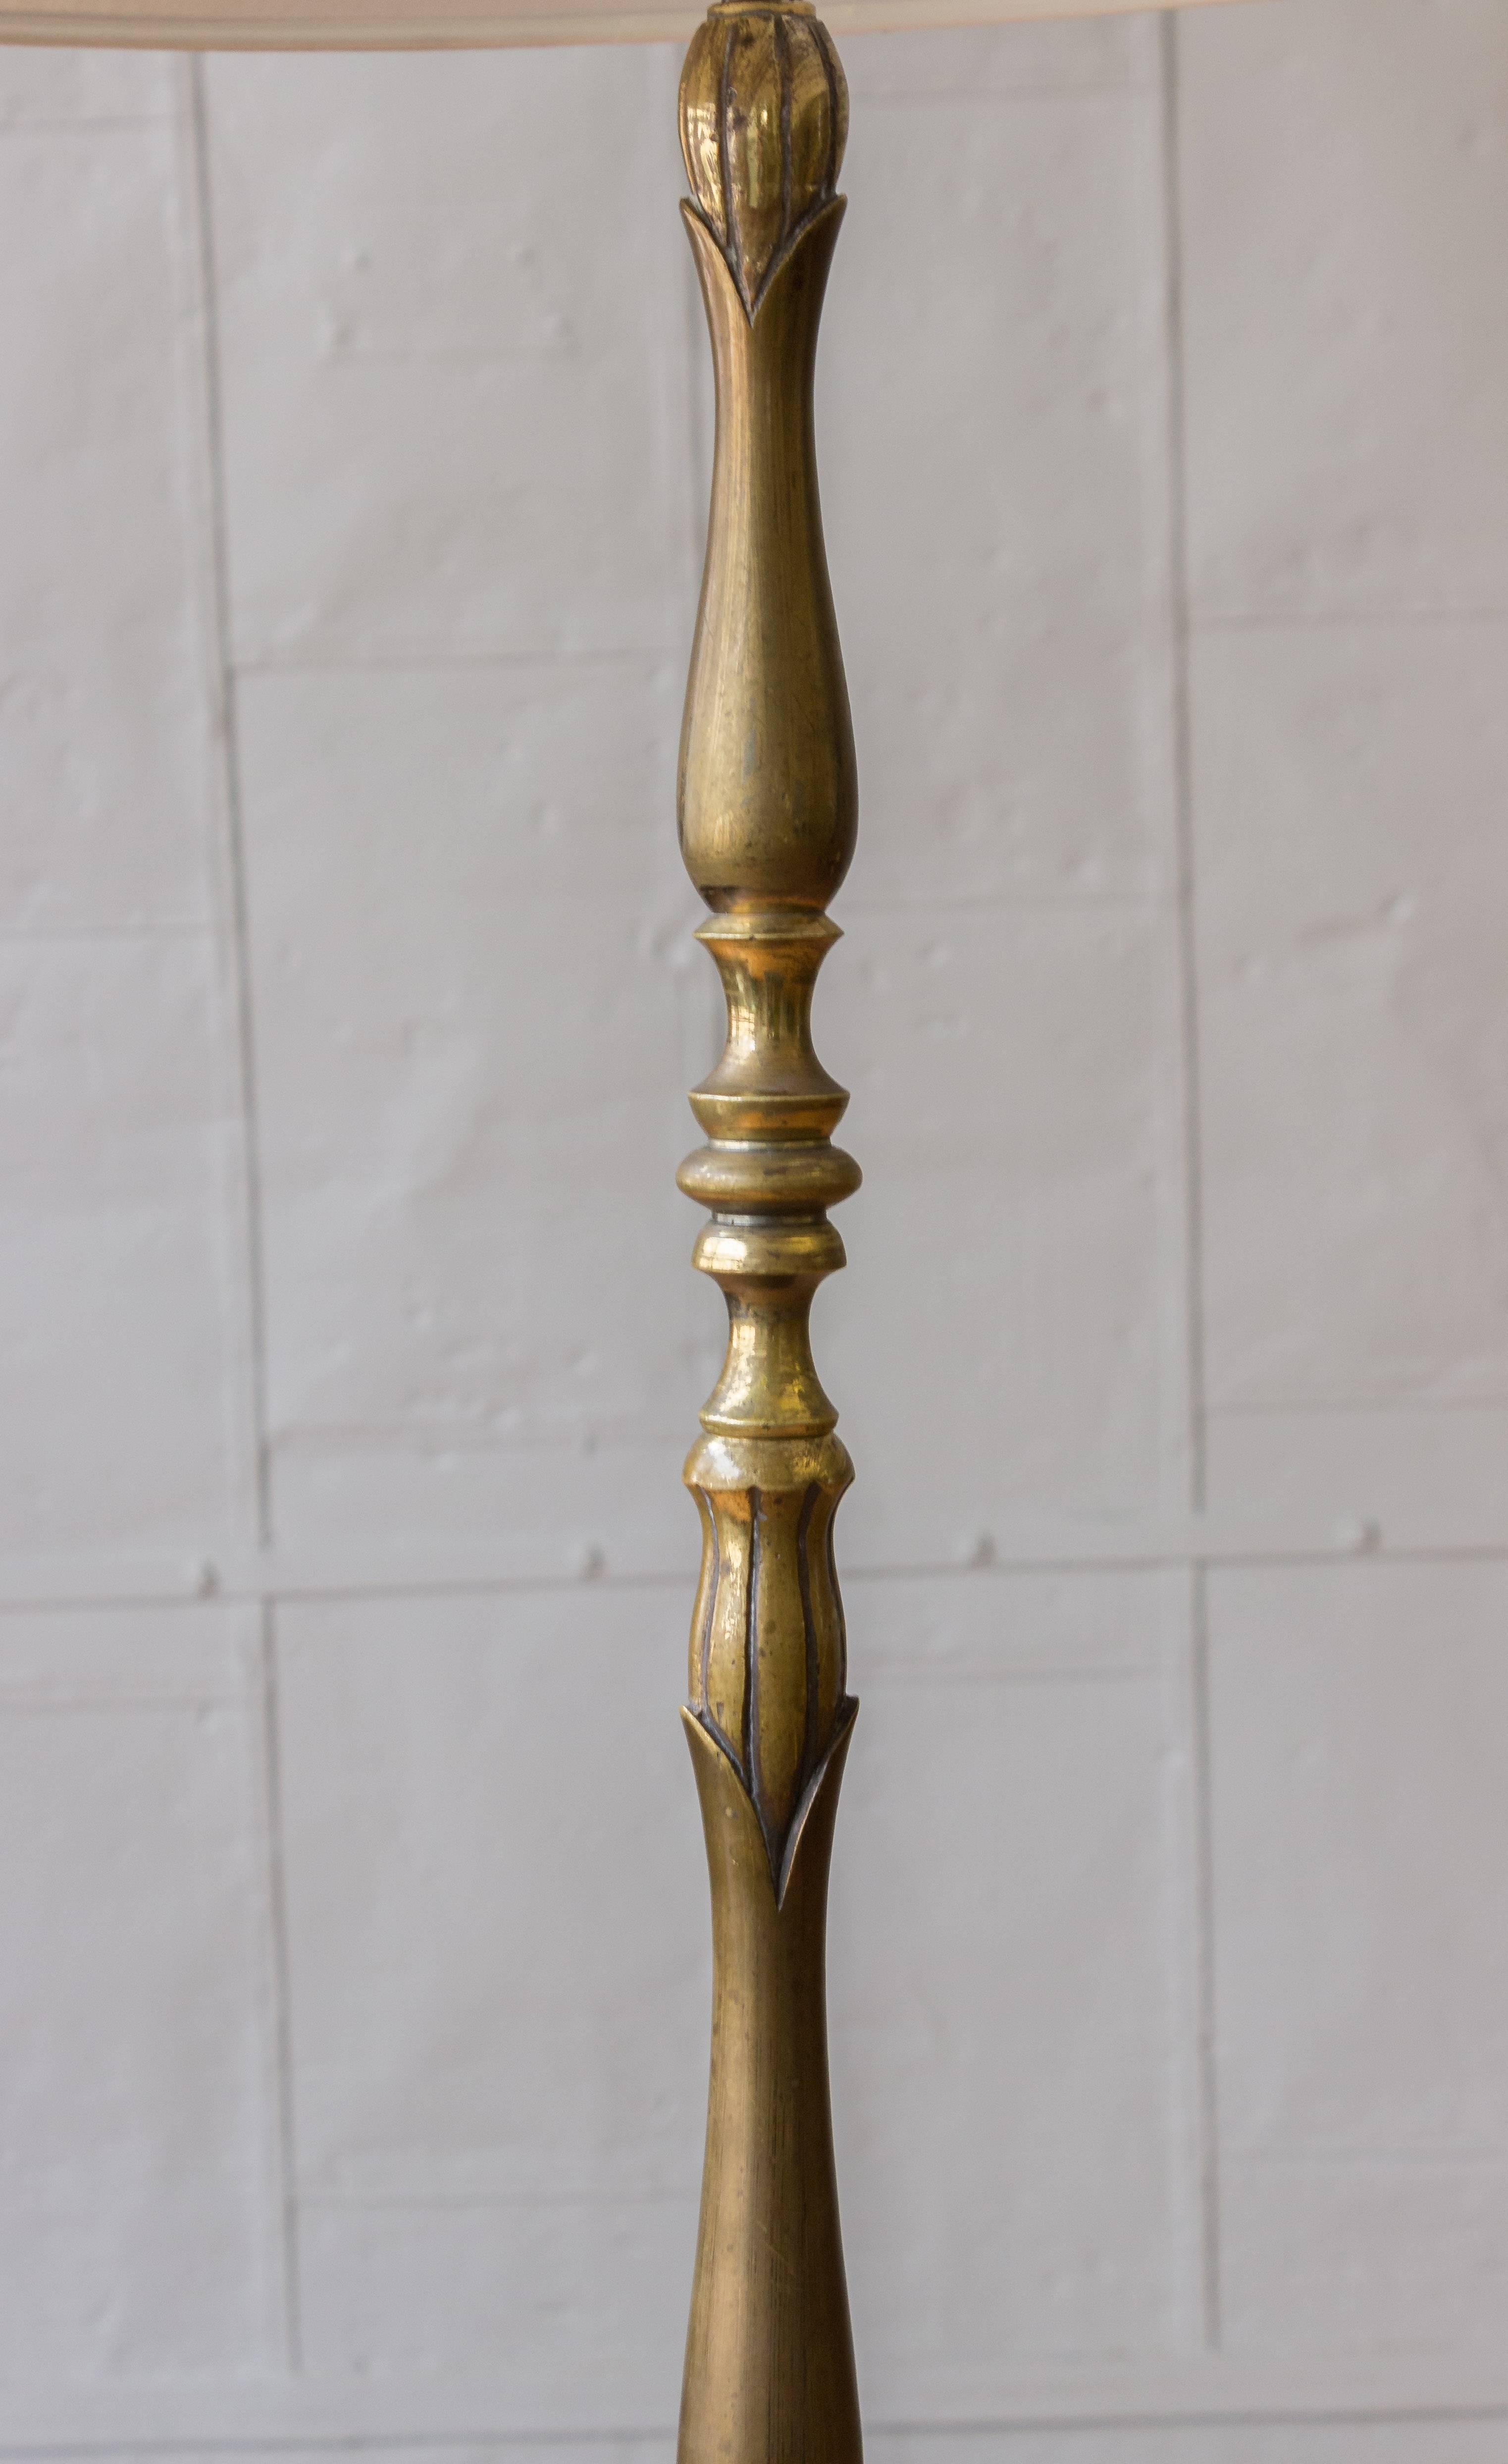 Early 20th Century French Art Nouveau Style Floor Lamp For Sale